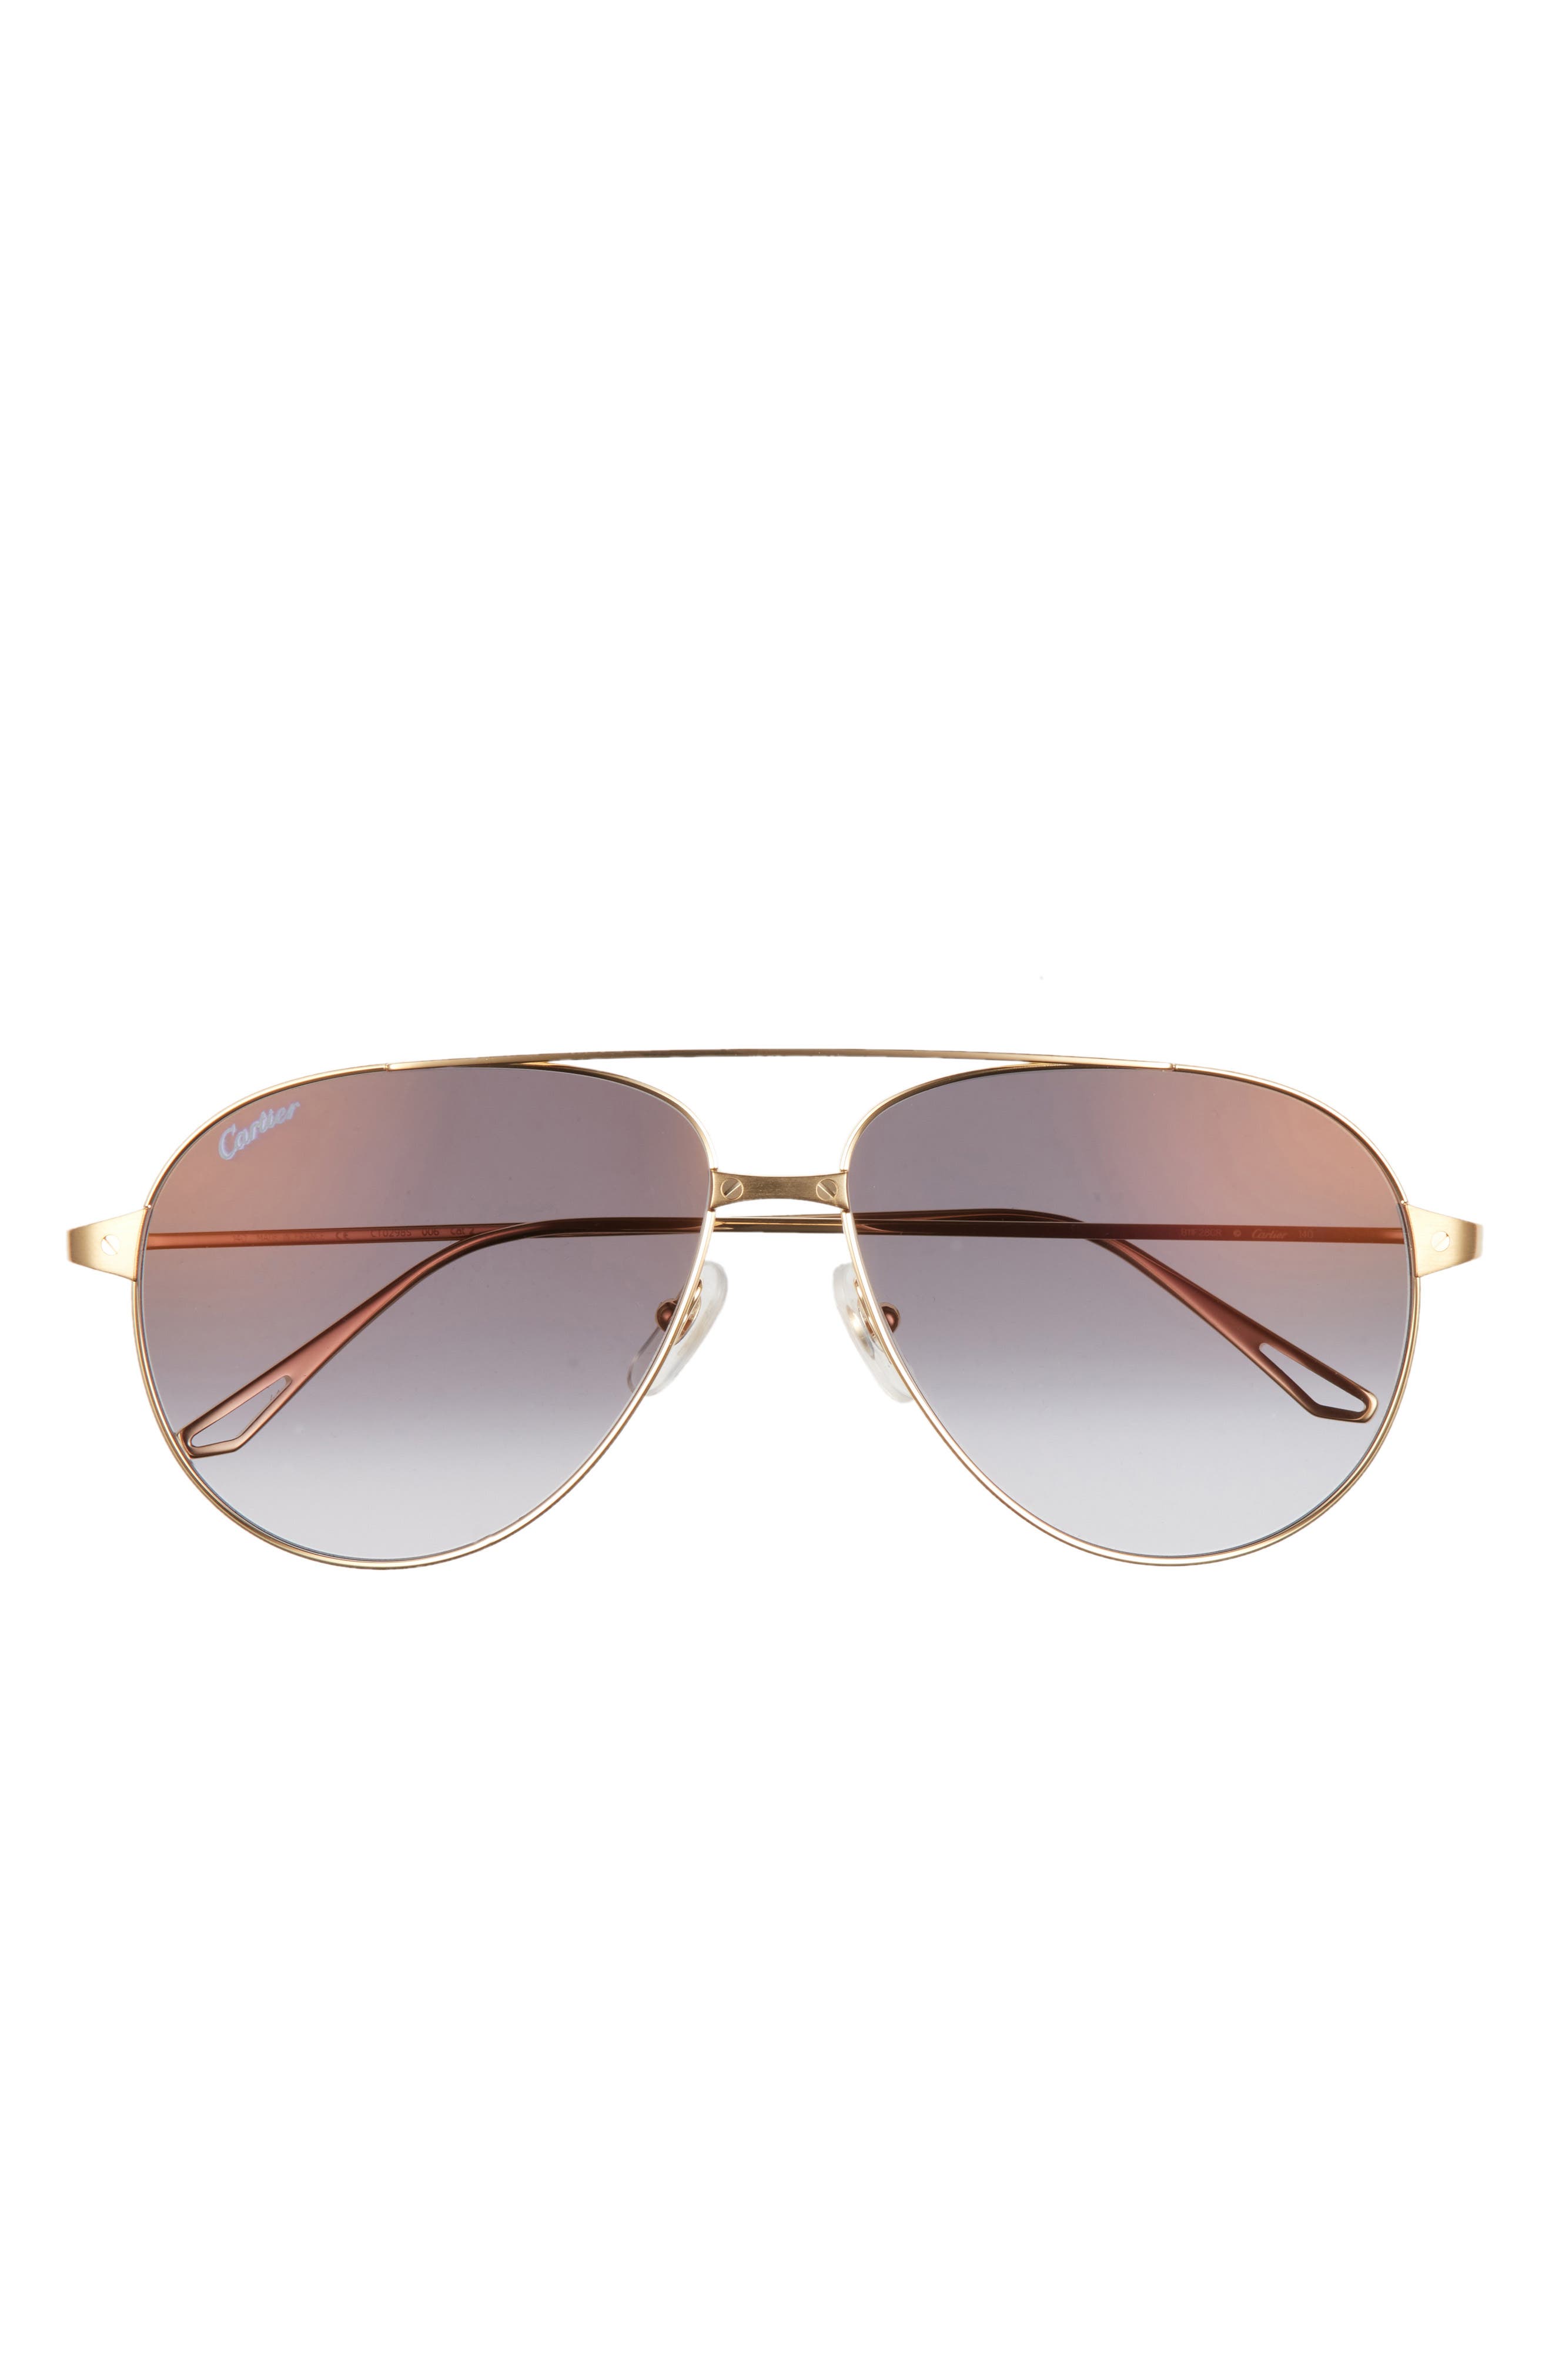 Cartier 59mm Aviator Sunglasses in Gold/Grey at Nordstrom